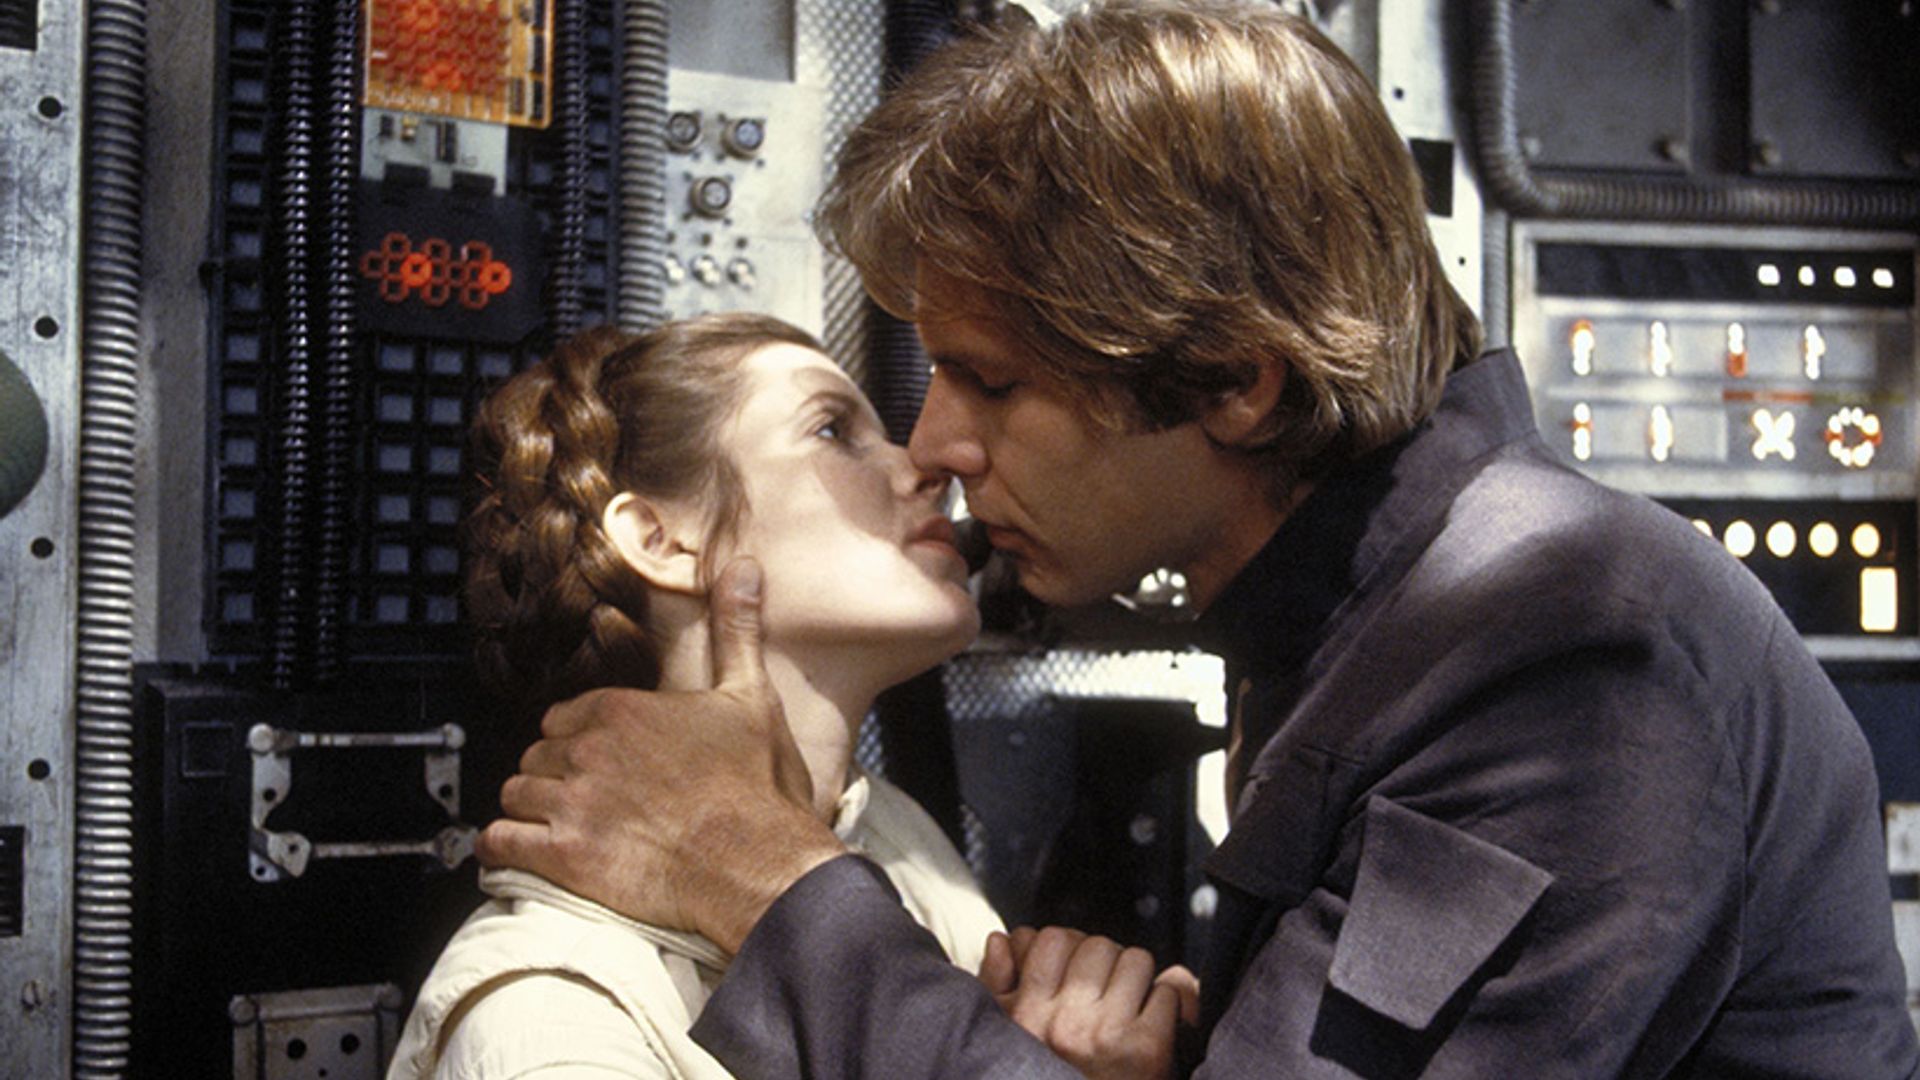 Carrie Fisher reveals she had a secret affair with Harrison Ford during Star Wars filming